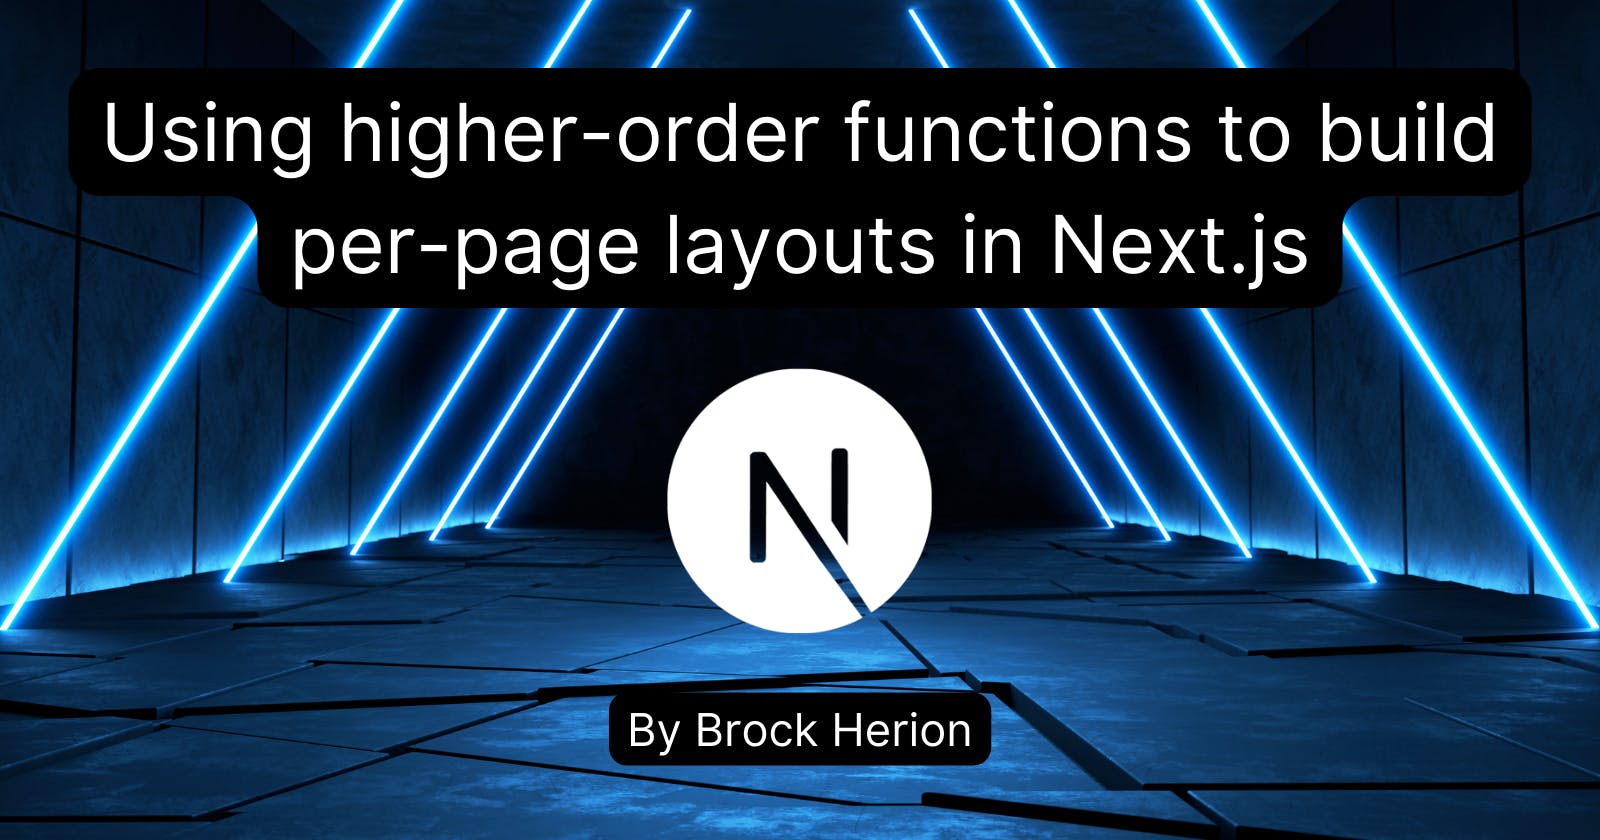 Using higher-order functions to build per-page layouts in NextJS